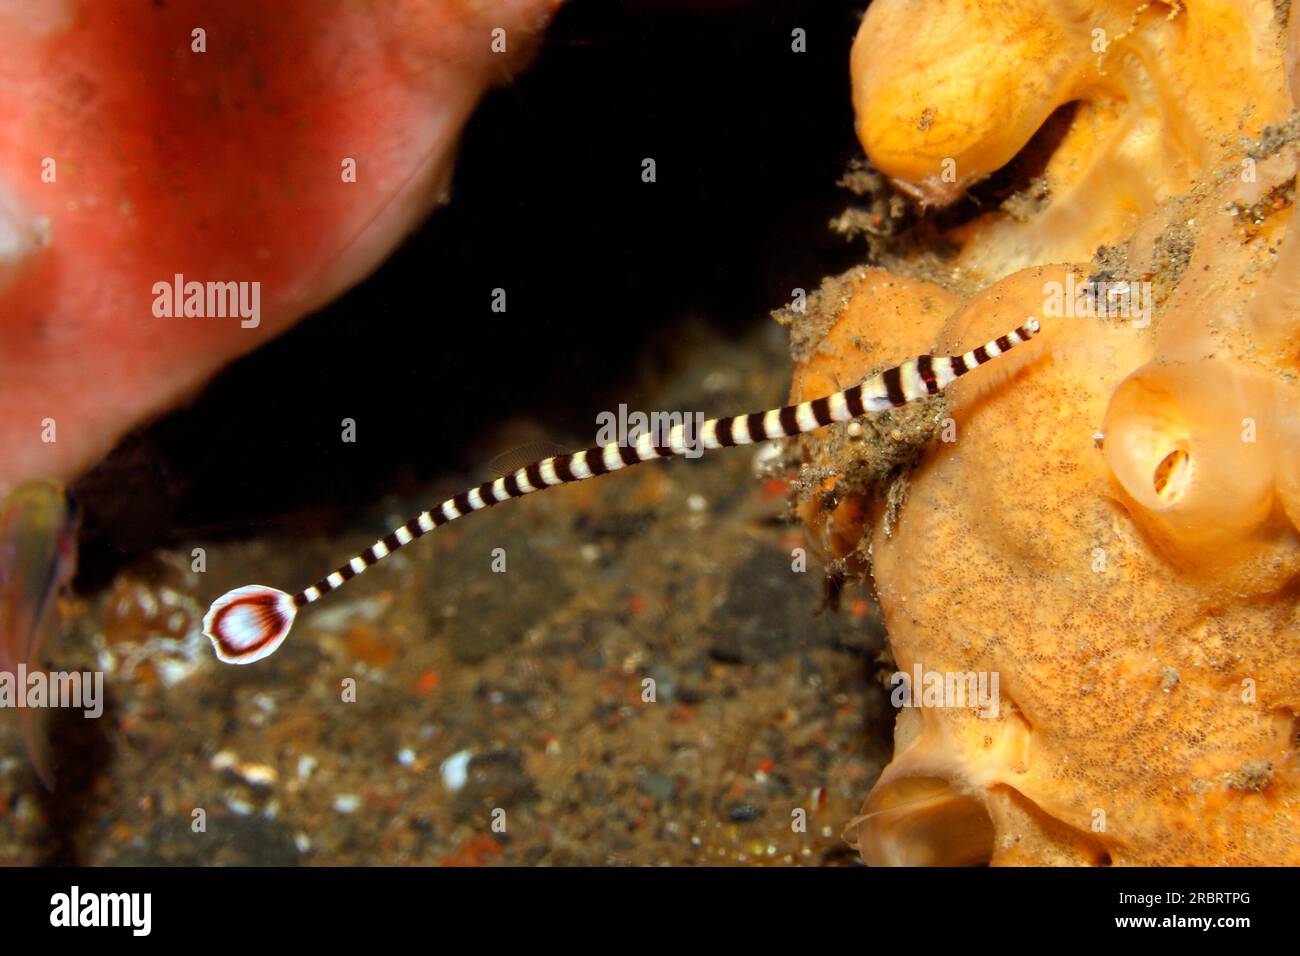 Banded Pipefish, or Ringed Pipefish, Dunckerocampus dactyliophorus. Previously described as  Doryrhamphus dactyliophorus and Syngnathus dactyliophorus Stock Photo